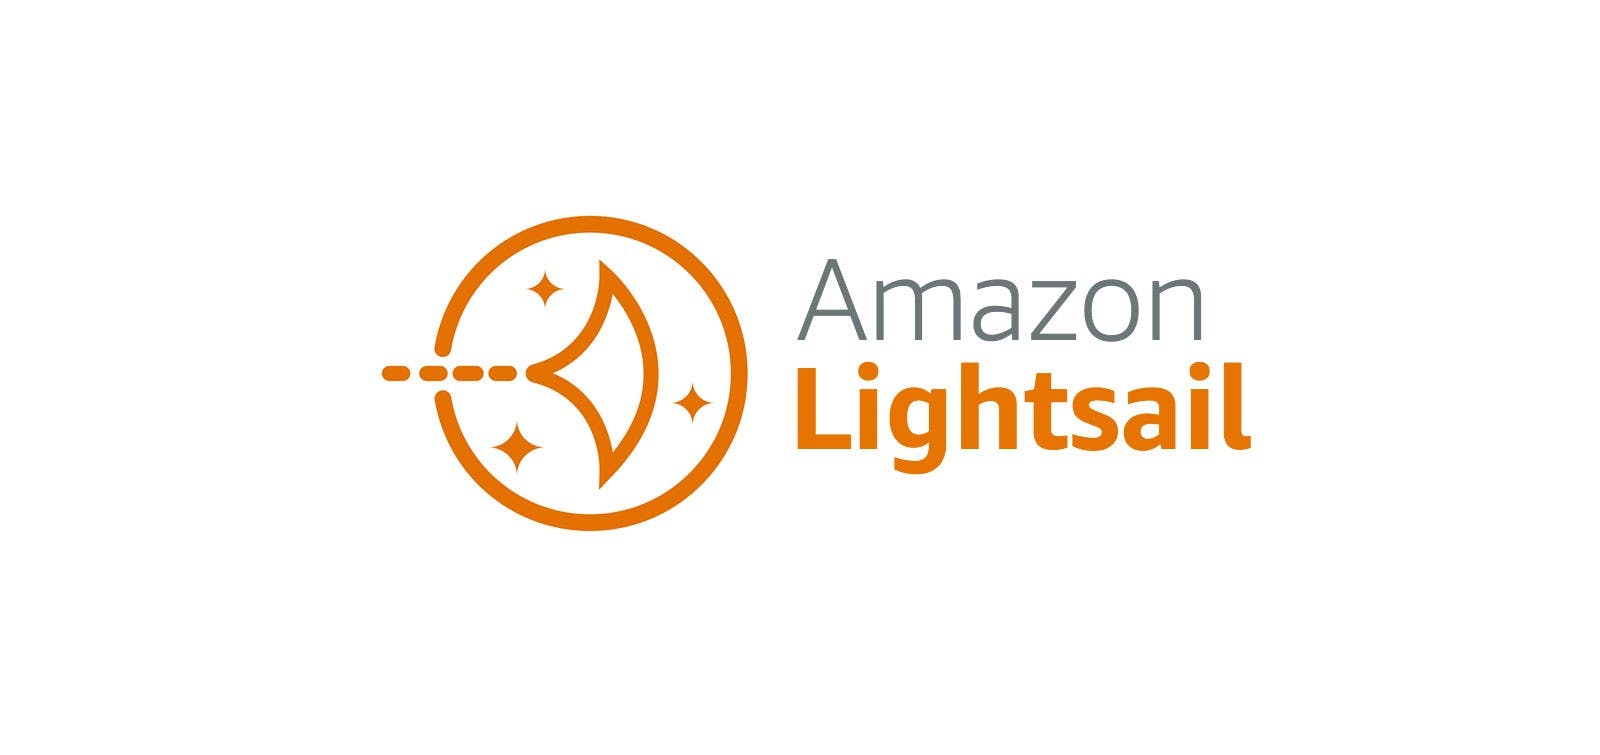 /what-is-amazon-lightsail-beaef47dd64e feature image